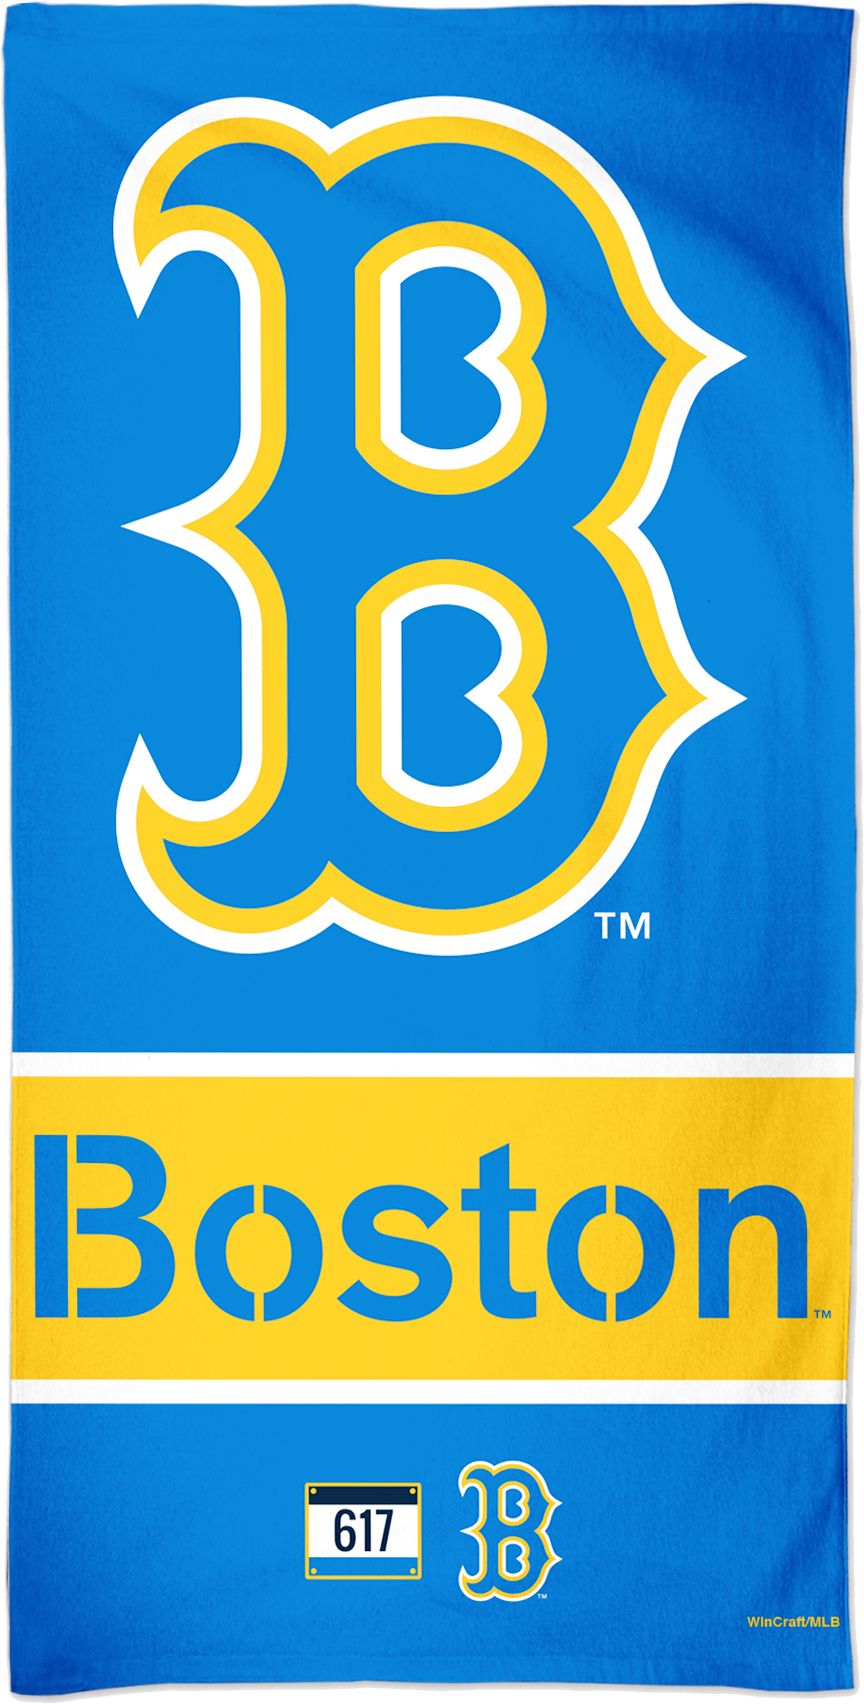 boston red sox city connect jersey